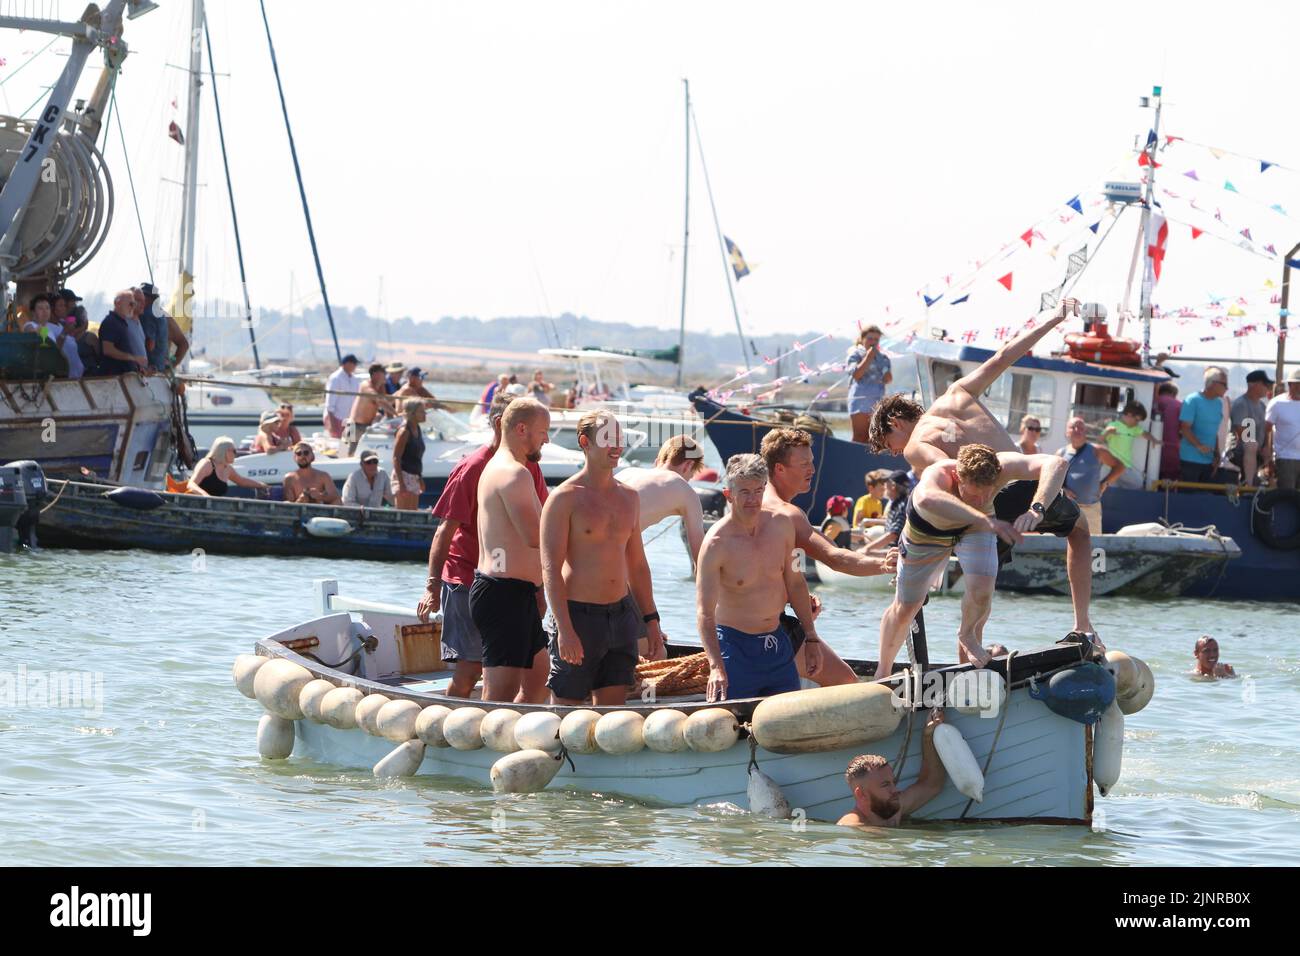 West Mersea Regatta is taking place on Mersea Island. The regatta has been run almost continually since 1838 and is organised by volunteers. Swimmers diving into the water ready for the start of the swimming race. Stock Photo